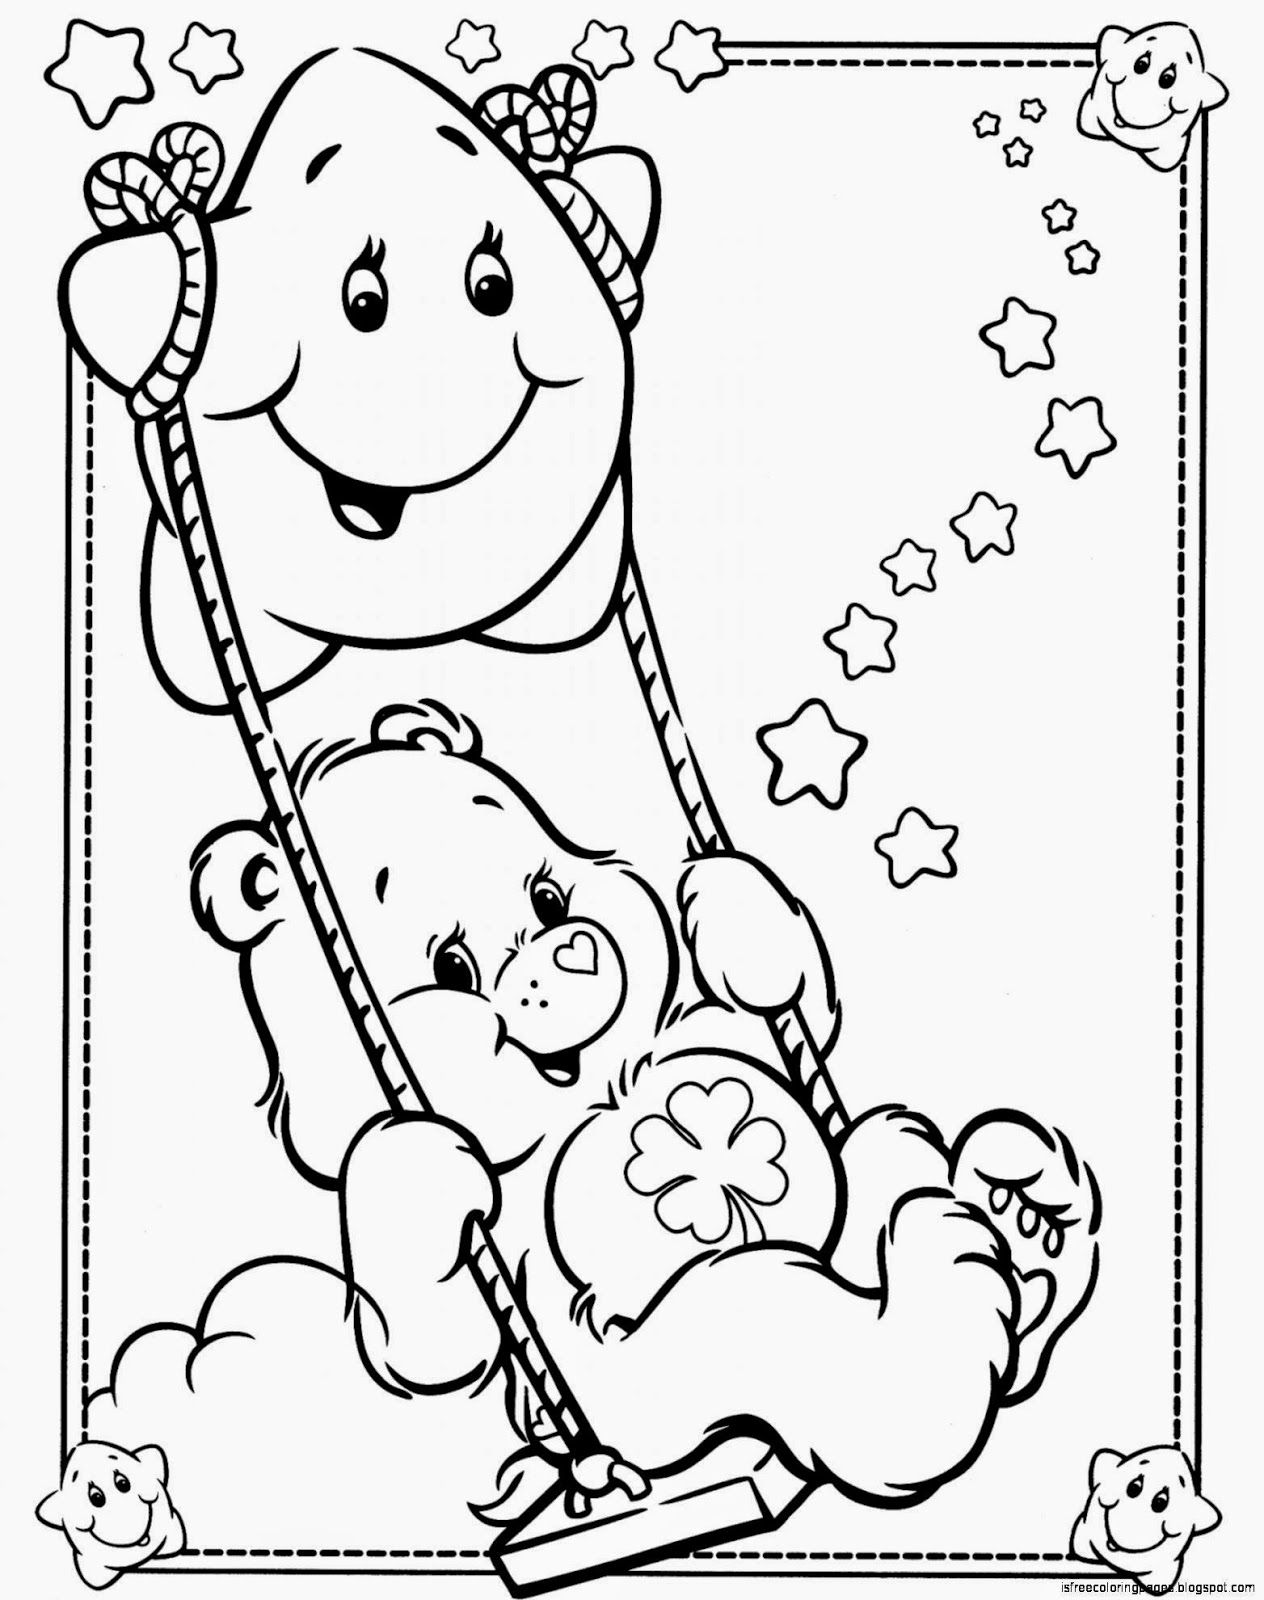 Care Bear - Coloring Pages for Kids and for Adults